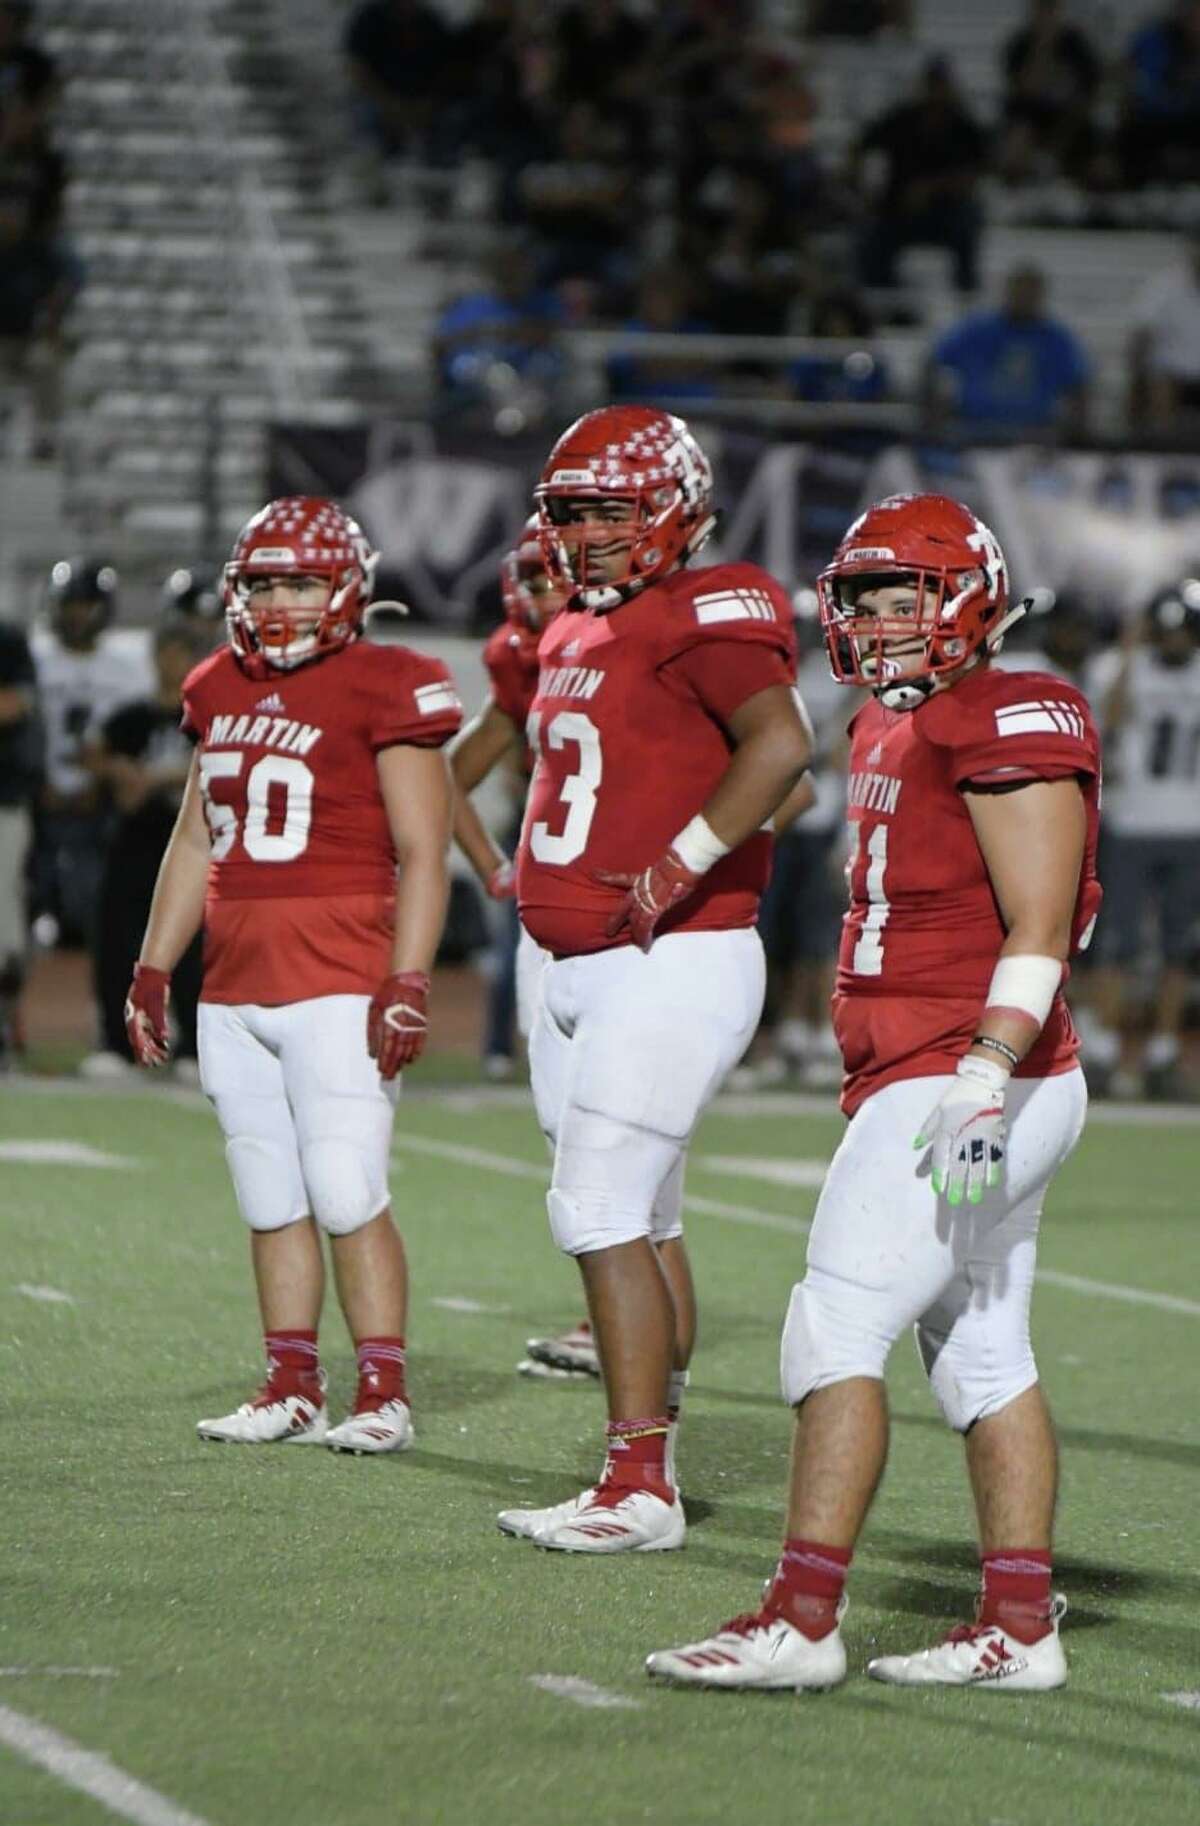 Martin’s defensive line — Ted Lares, Robert Rincon and Marcus Vara — all earned first team All-District honors last season. This year, all three aim to make the All-City team.